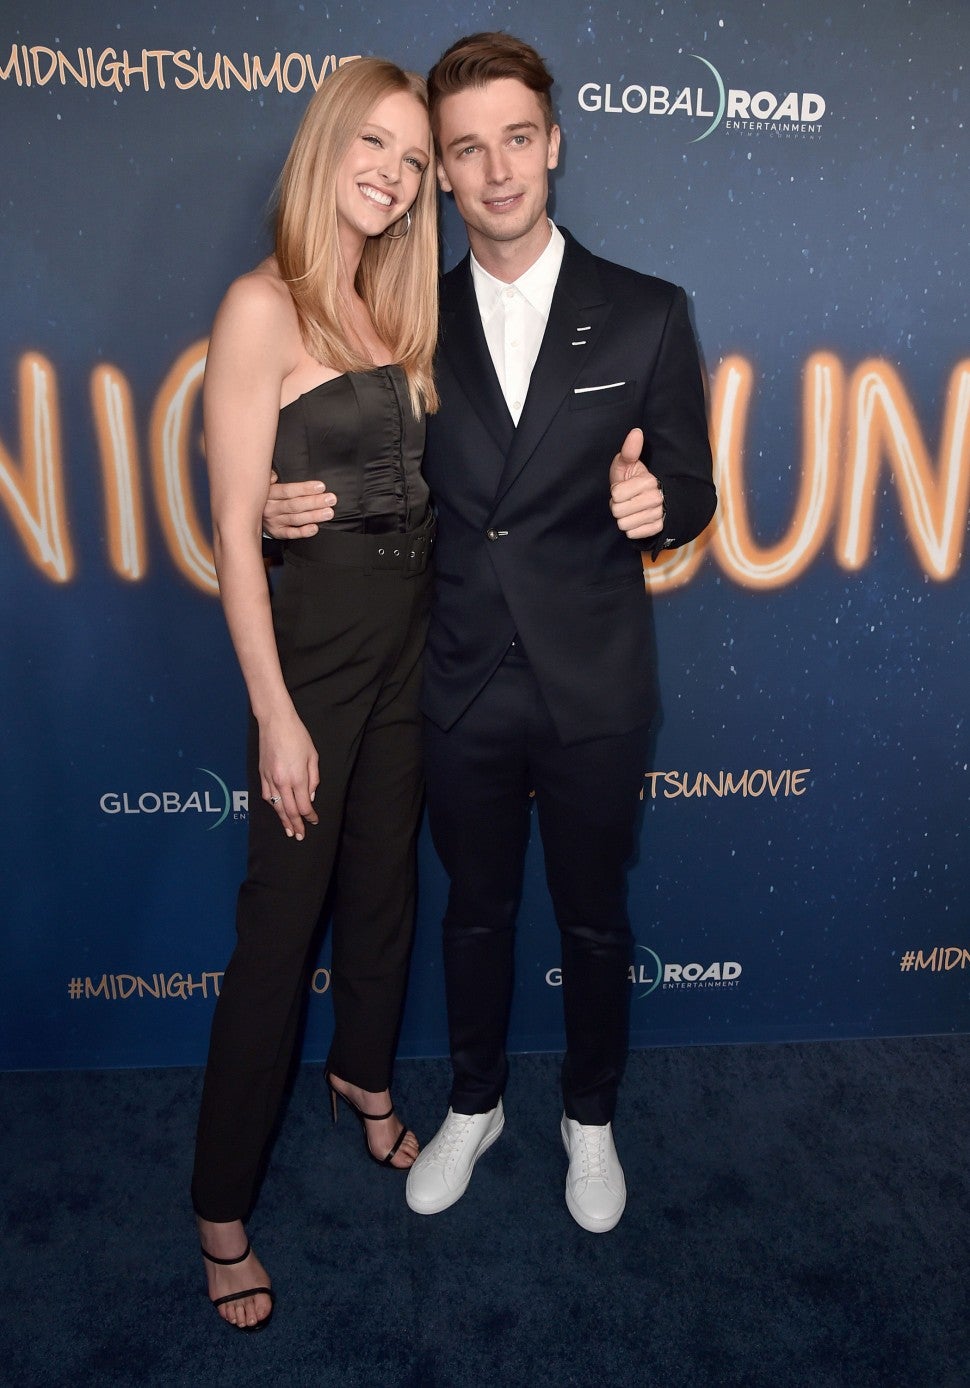 Patrick Schwarzenegger and Abby Champion at the 'Midnight Sun' premiere in Hollywood